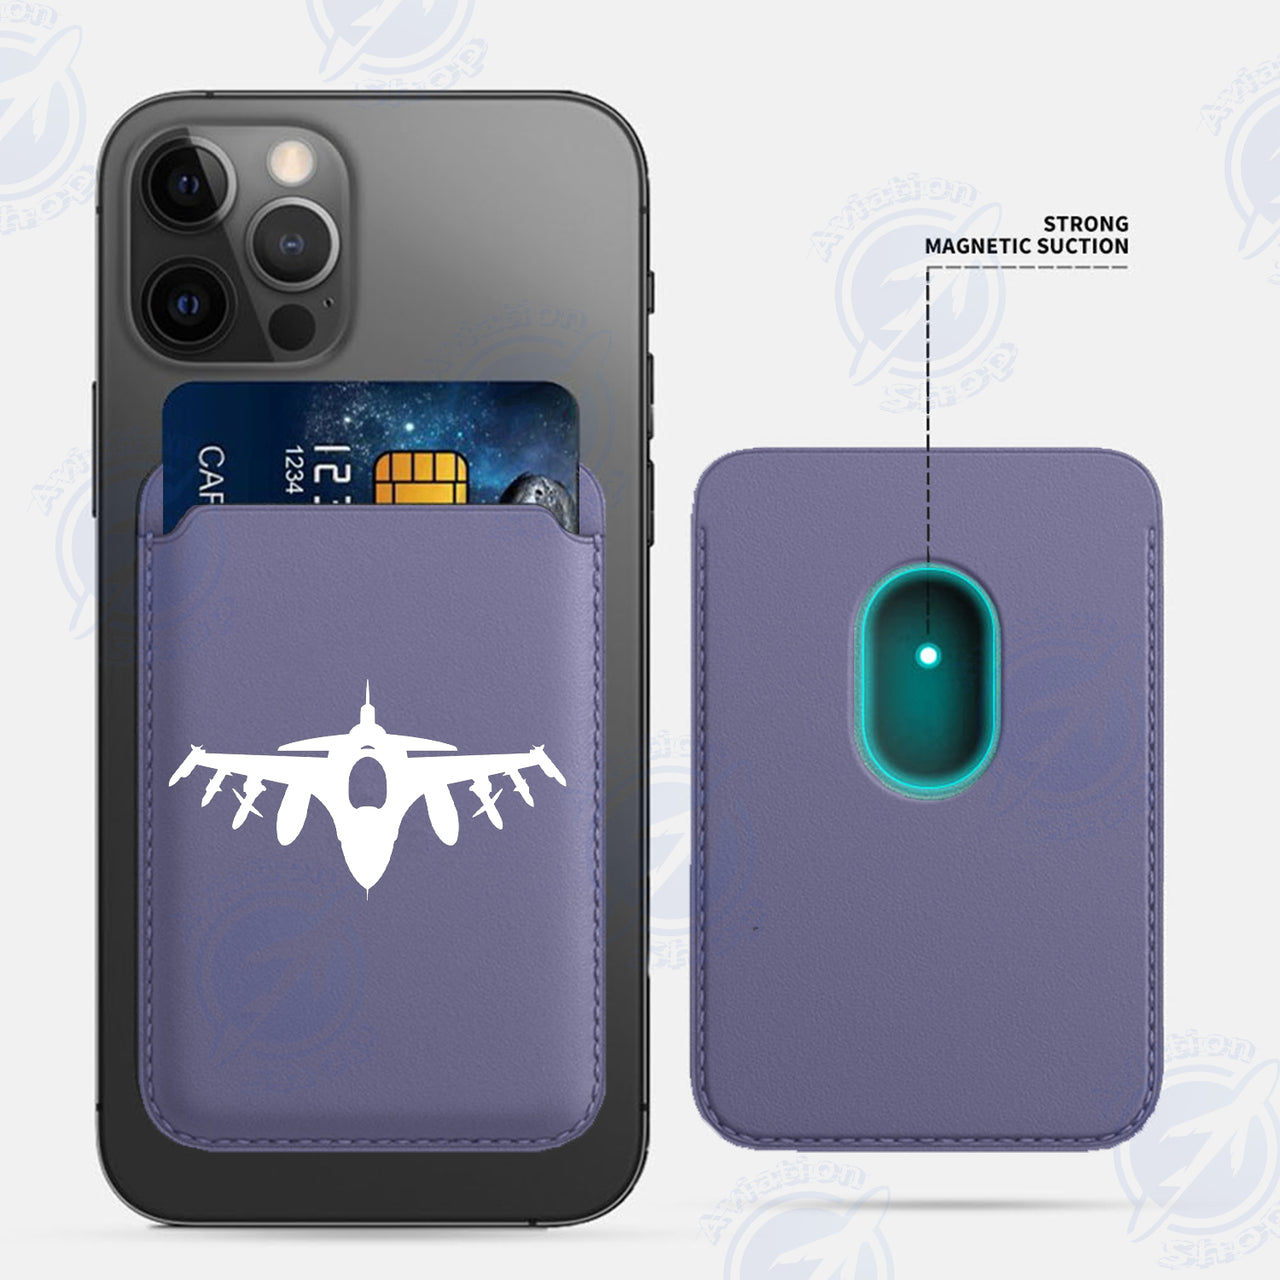 Fighting Falcon F16 Silhouette iPhone Cases Magnetic Card Wallet